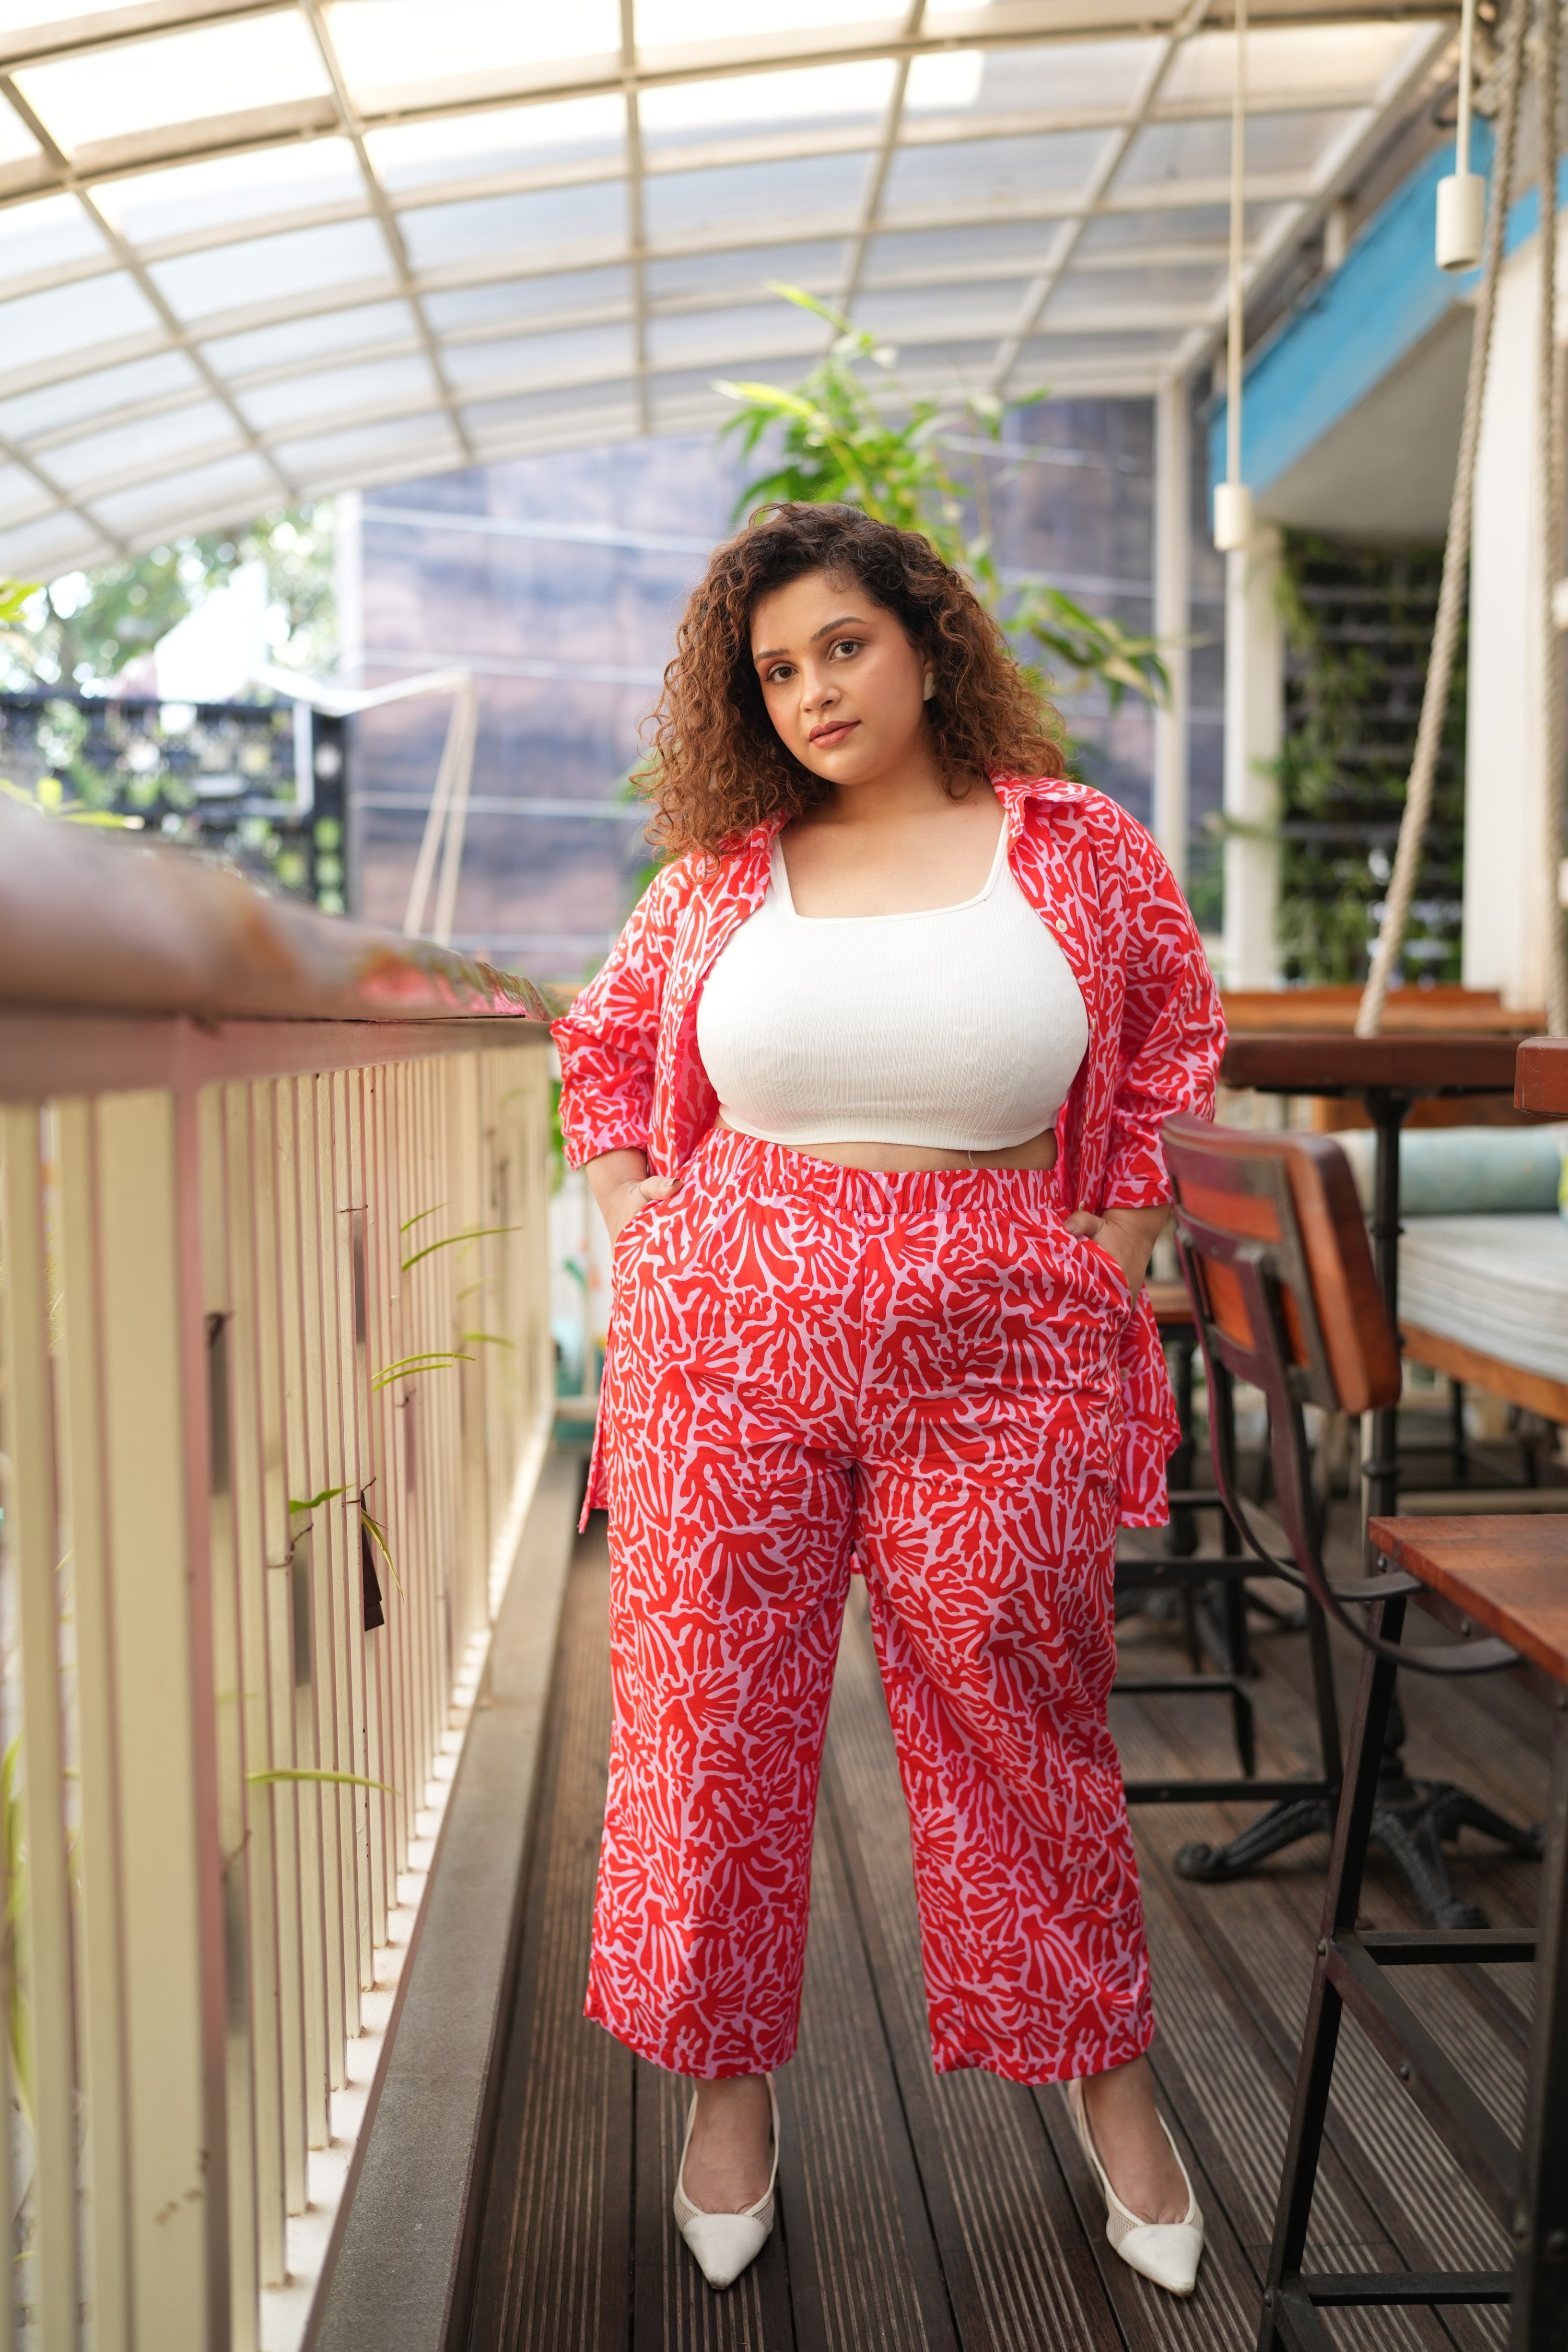 Plus Size Co Ord Sets - Trendy Co Ord Sets For Curvy Women – The Pink Moon